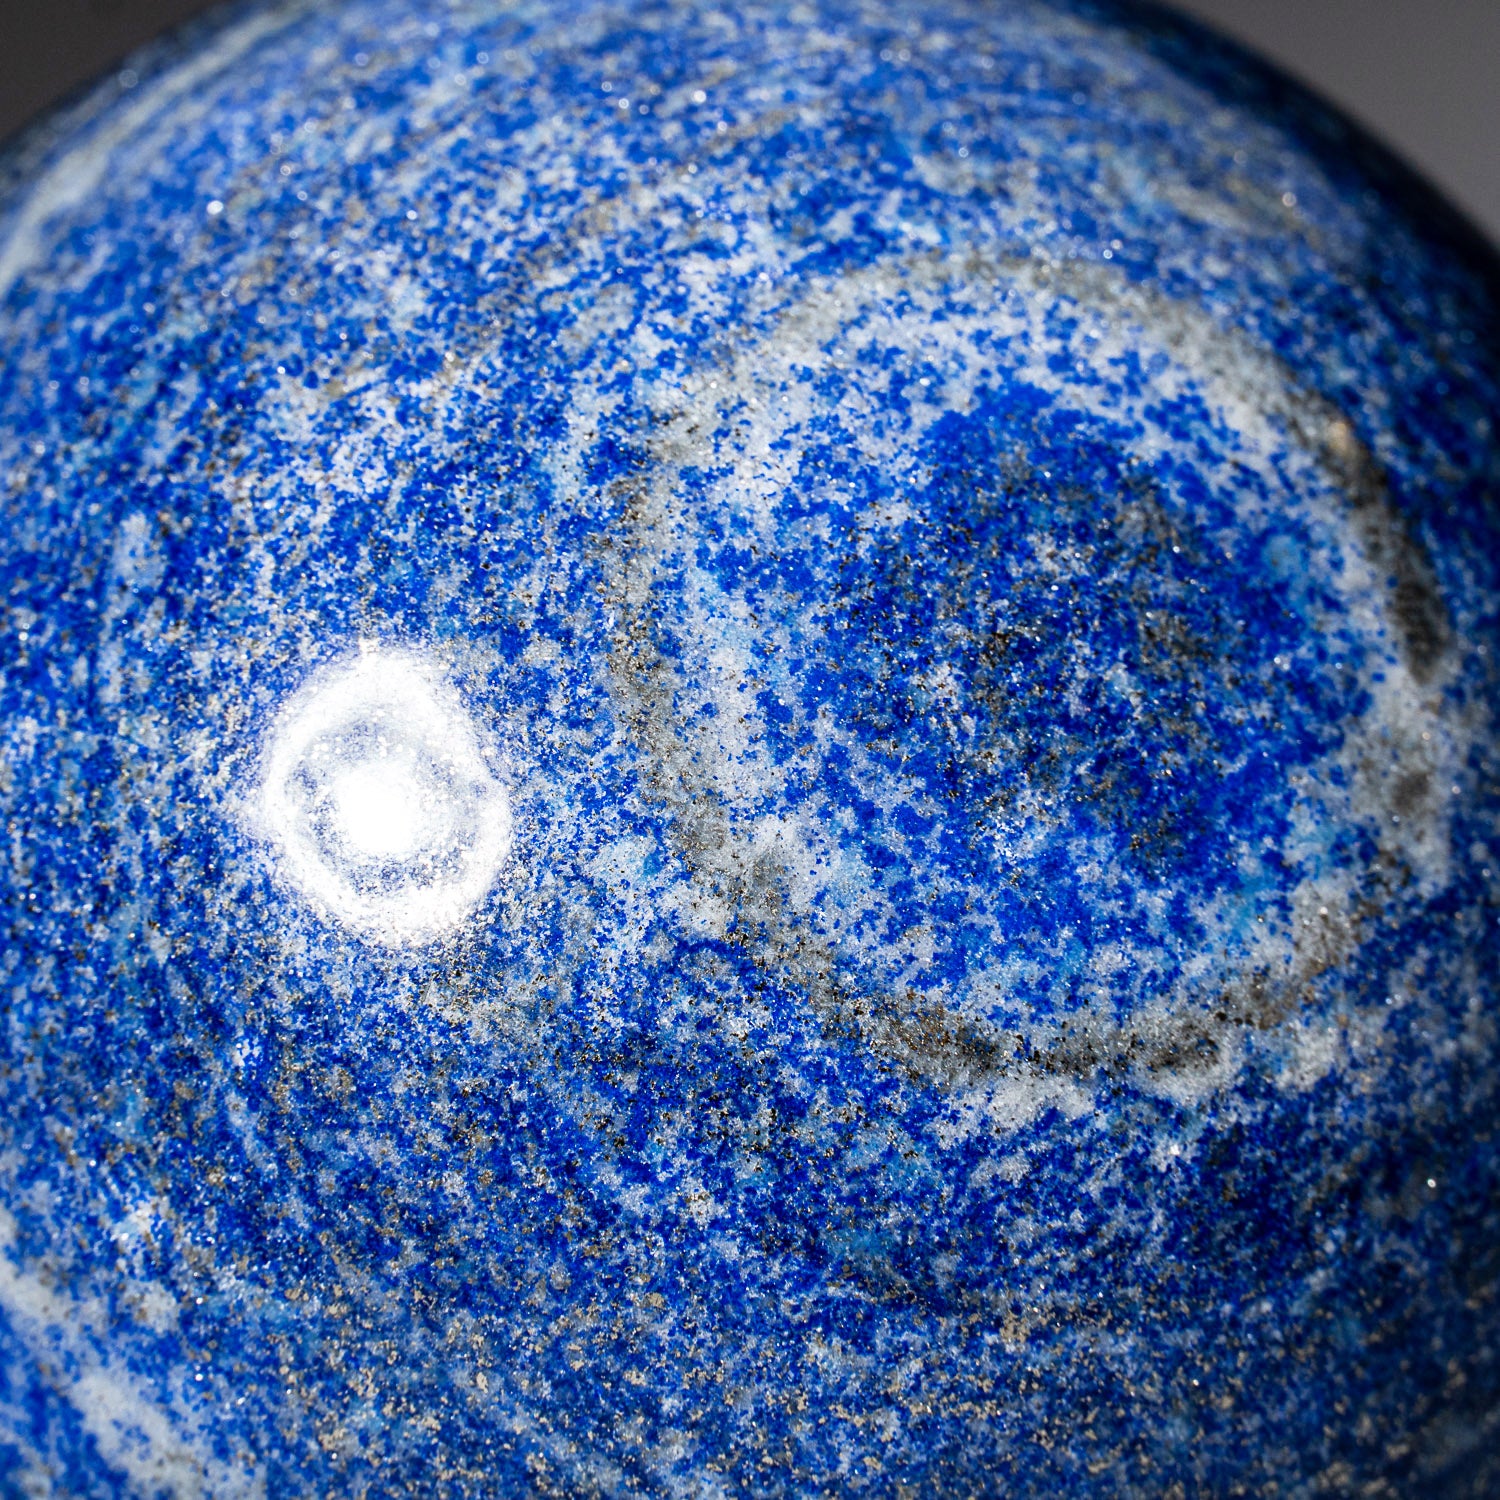 Polished Lapis Lazuli Sphere from Afghanistan (4", 5.2 lbs)